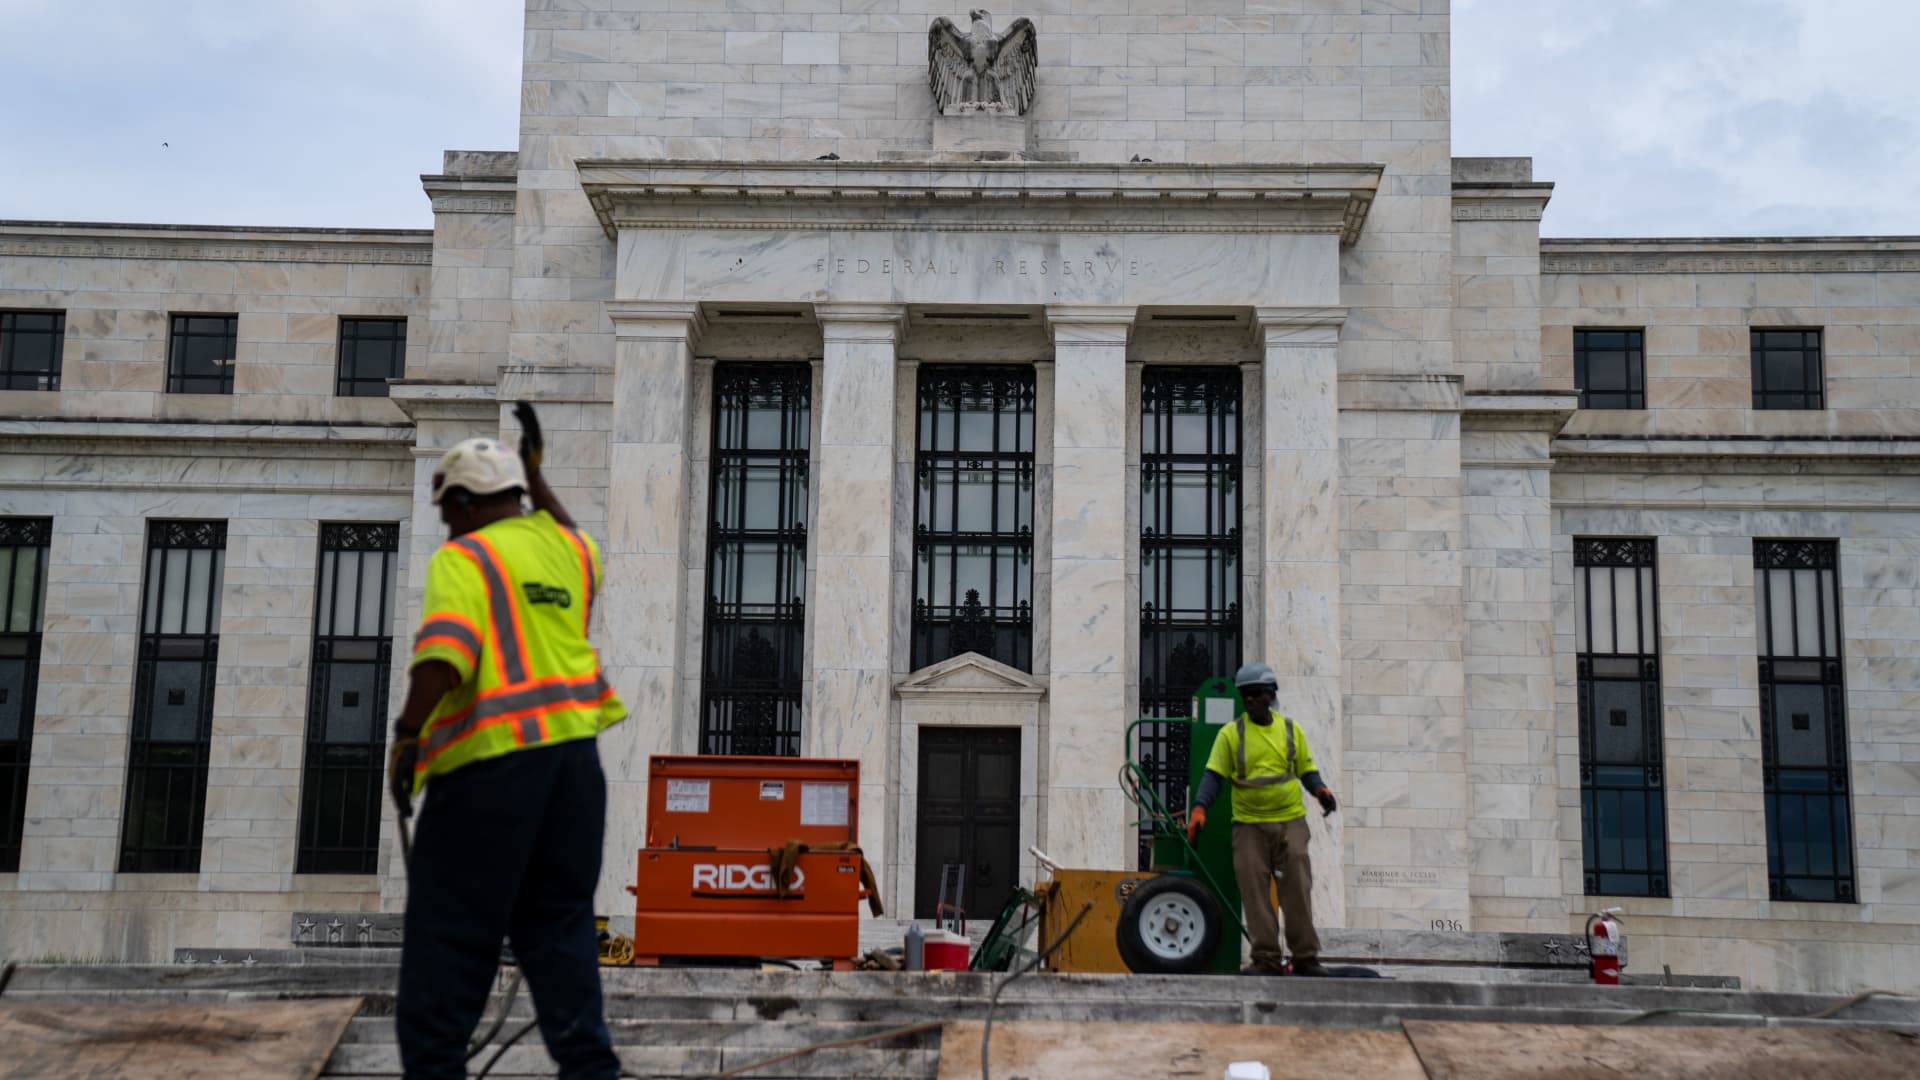 This is every little thing the Federal Reserve is predicted to do right now